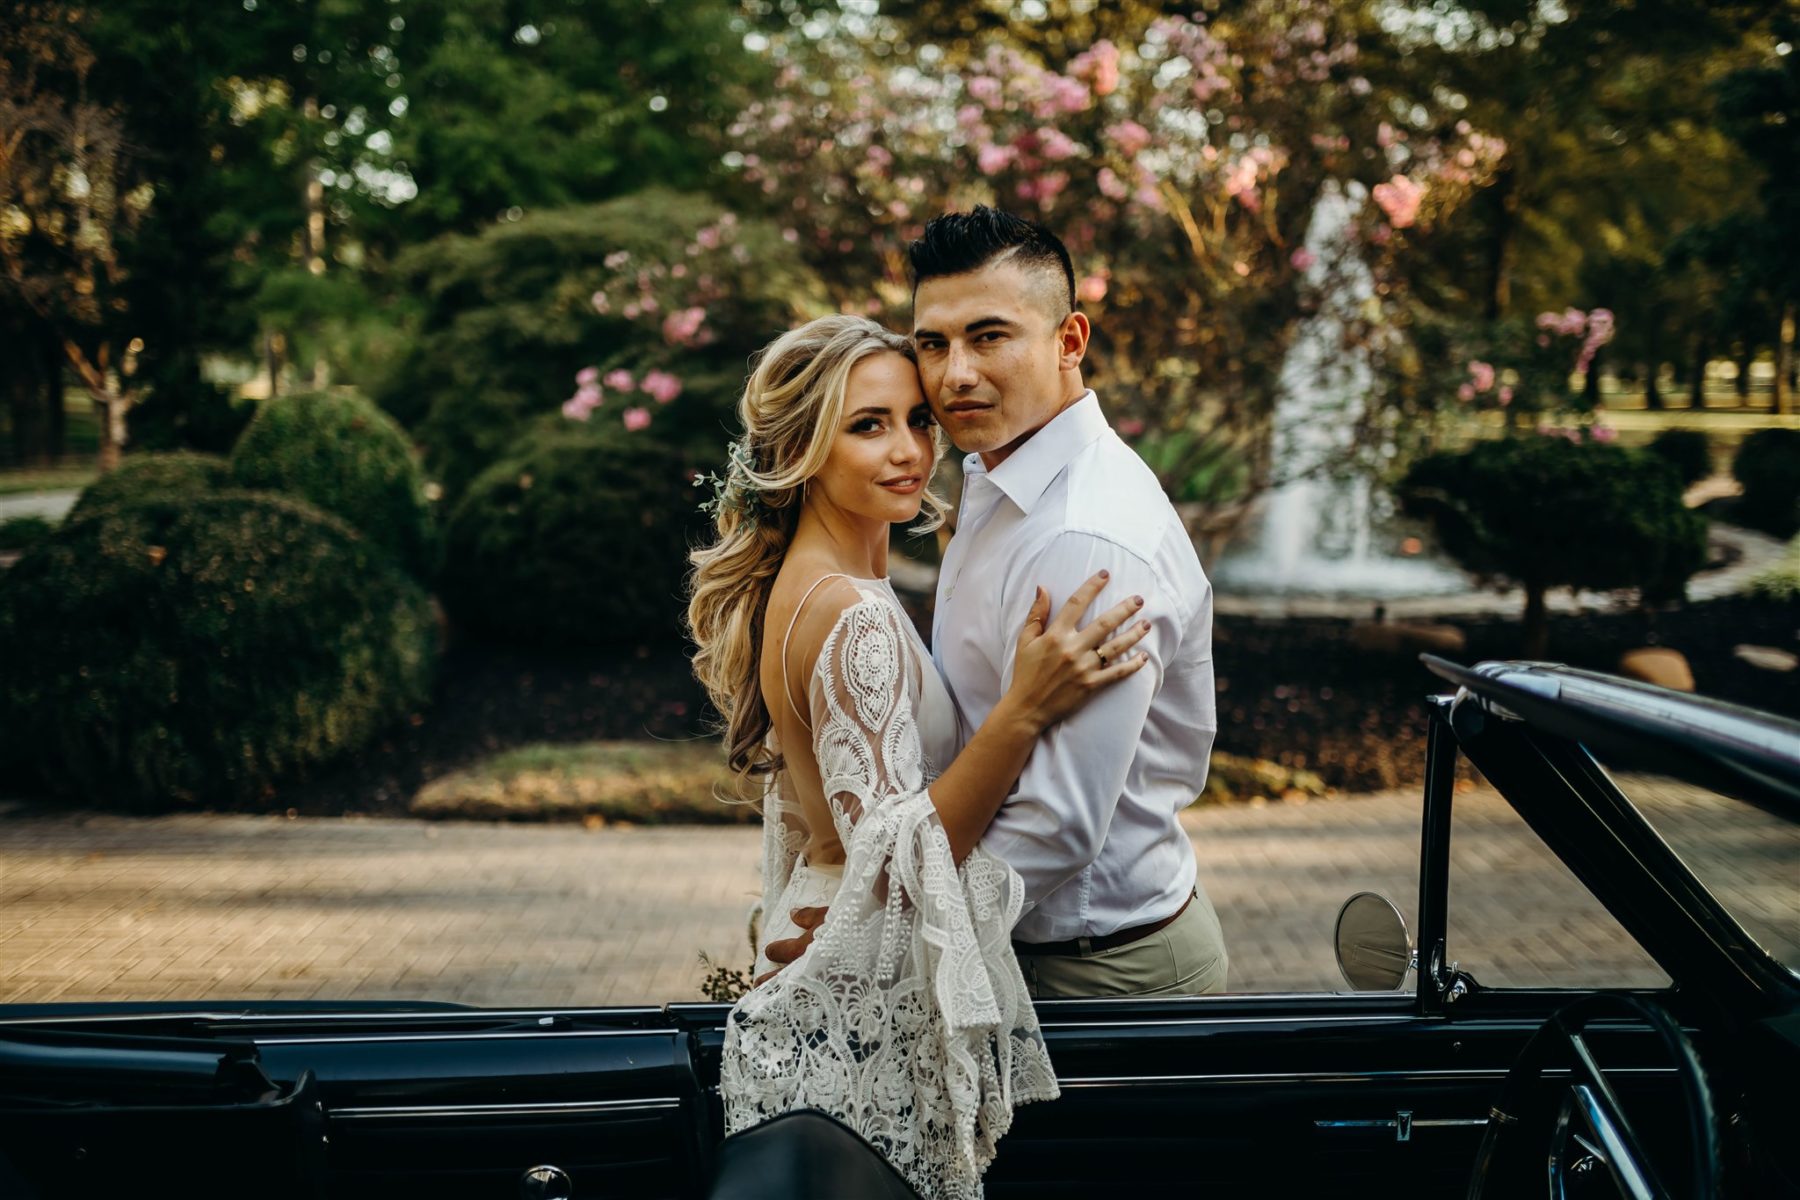 Boho Winter Wedding Styled Shoot by Riley Gardner Photography featured on Nashville Bride Guide